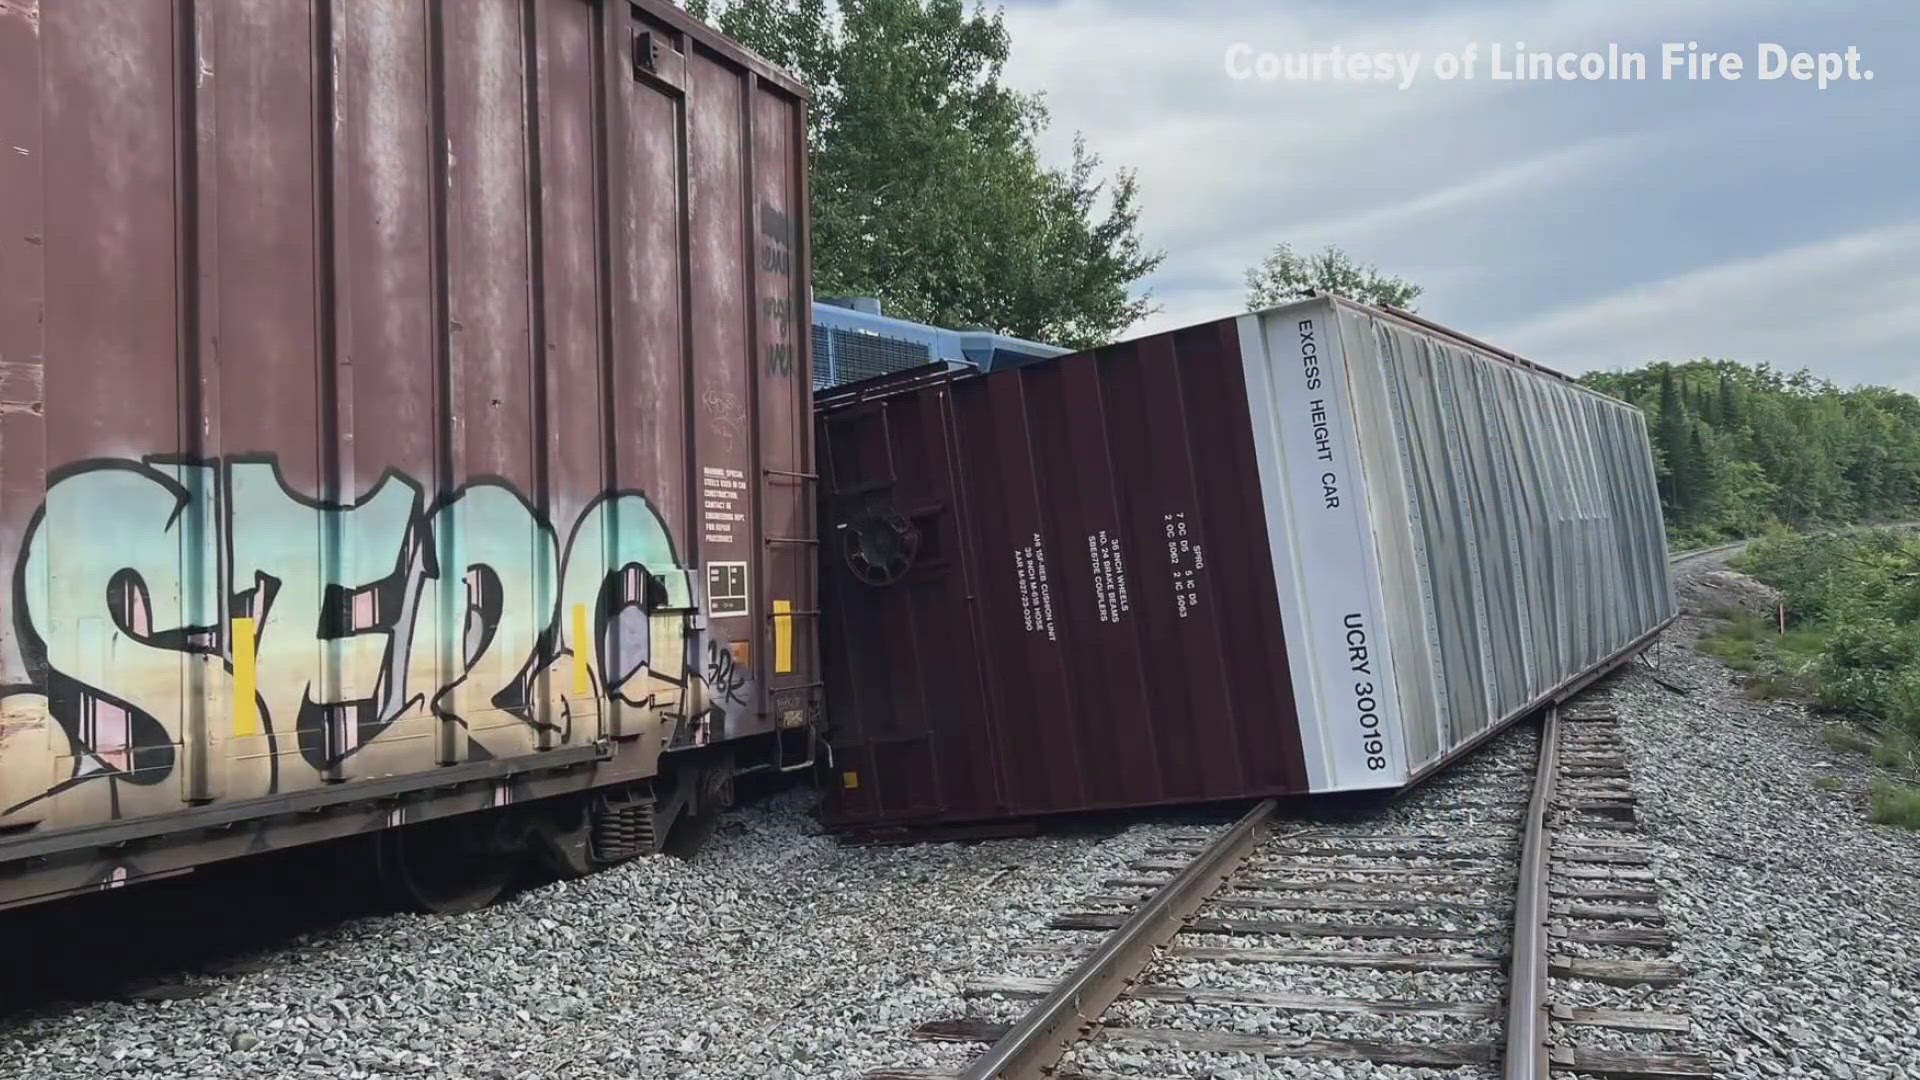 Lincoln fire officials two box cars went off the tracks Tuesday when a CSX train truck a parked train car. Officials said diesel fuel did not spill into the river.